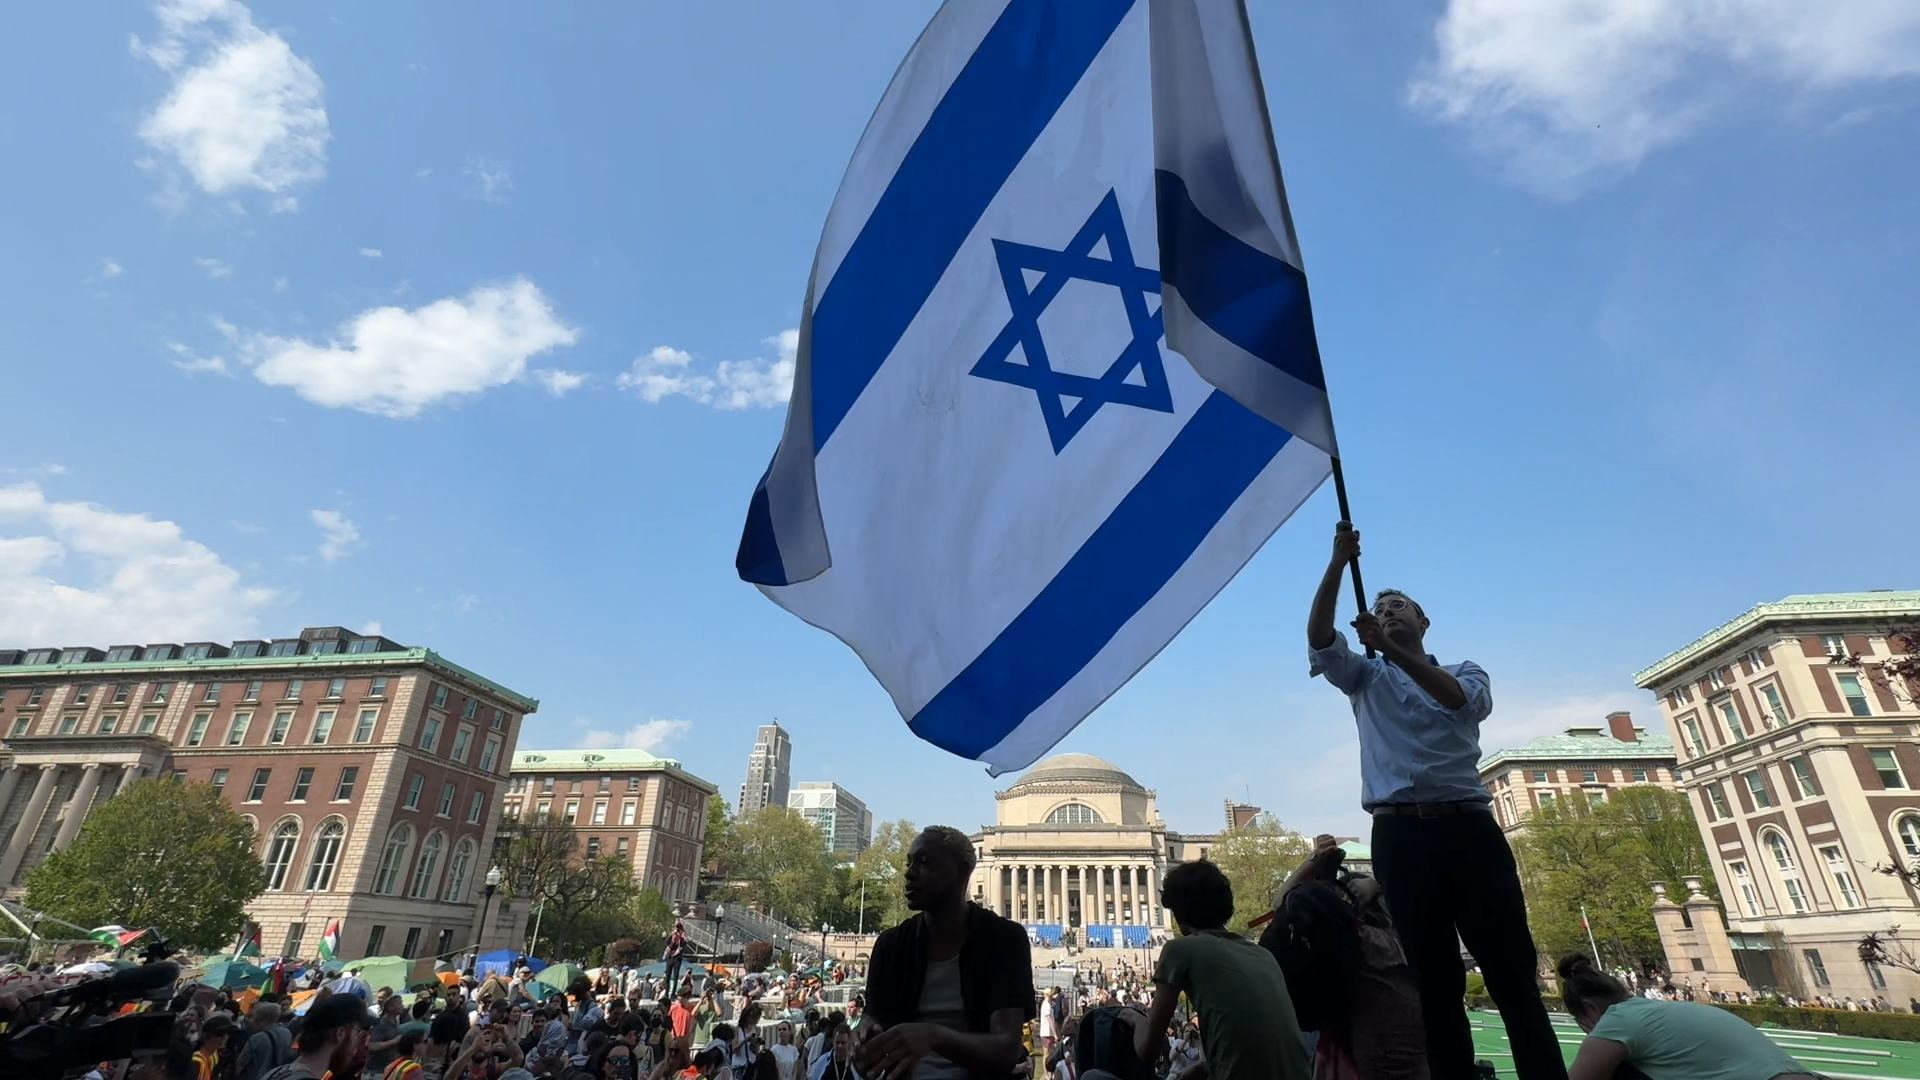 Student waves giant Israeli flag as protests continue at Columbia University (Video)